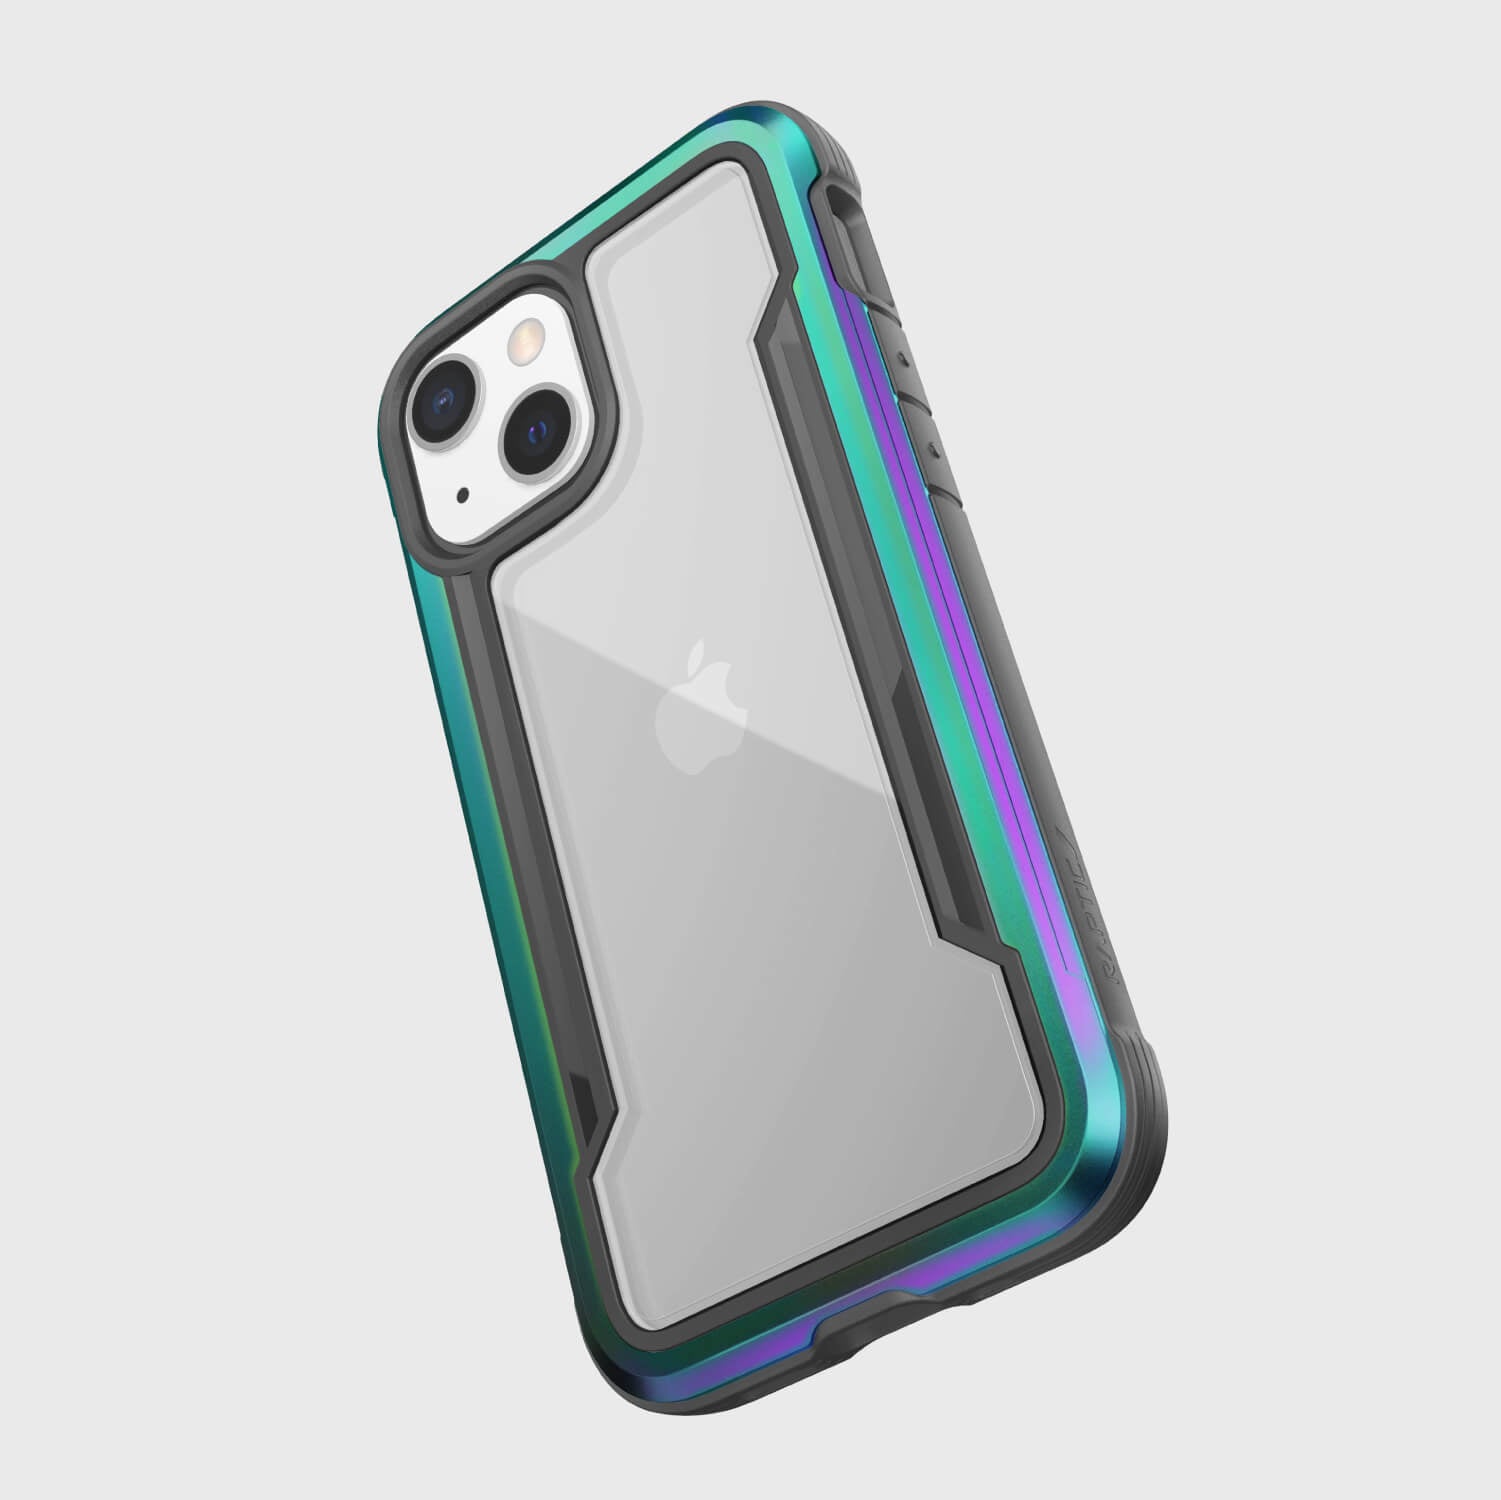 The Raptic iPhone 13 Mini Case - SHIELD PRO is shown with a rainbow colored back.